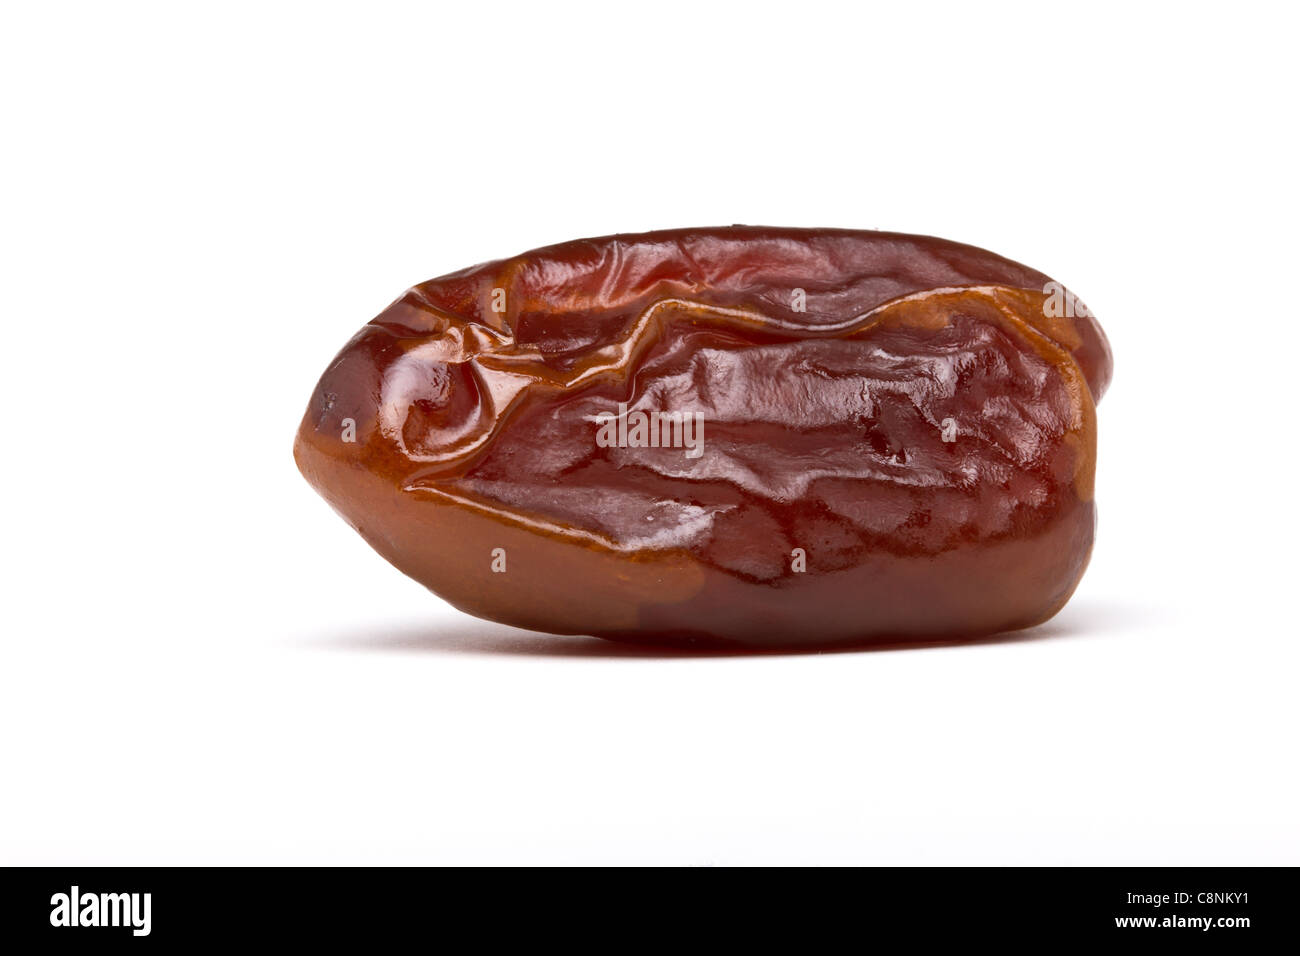 Single dried date fruit from low perspective on white background. Stock Photo